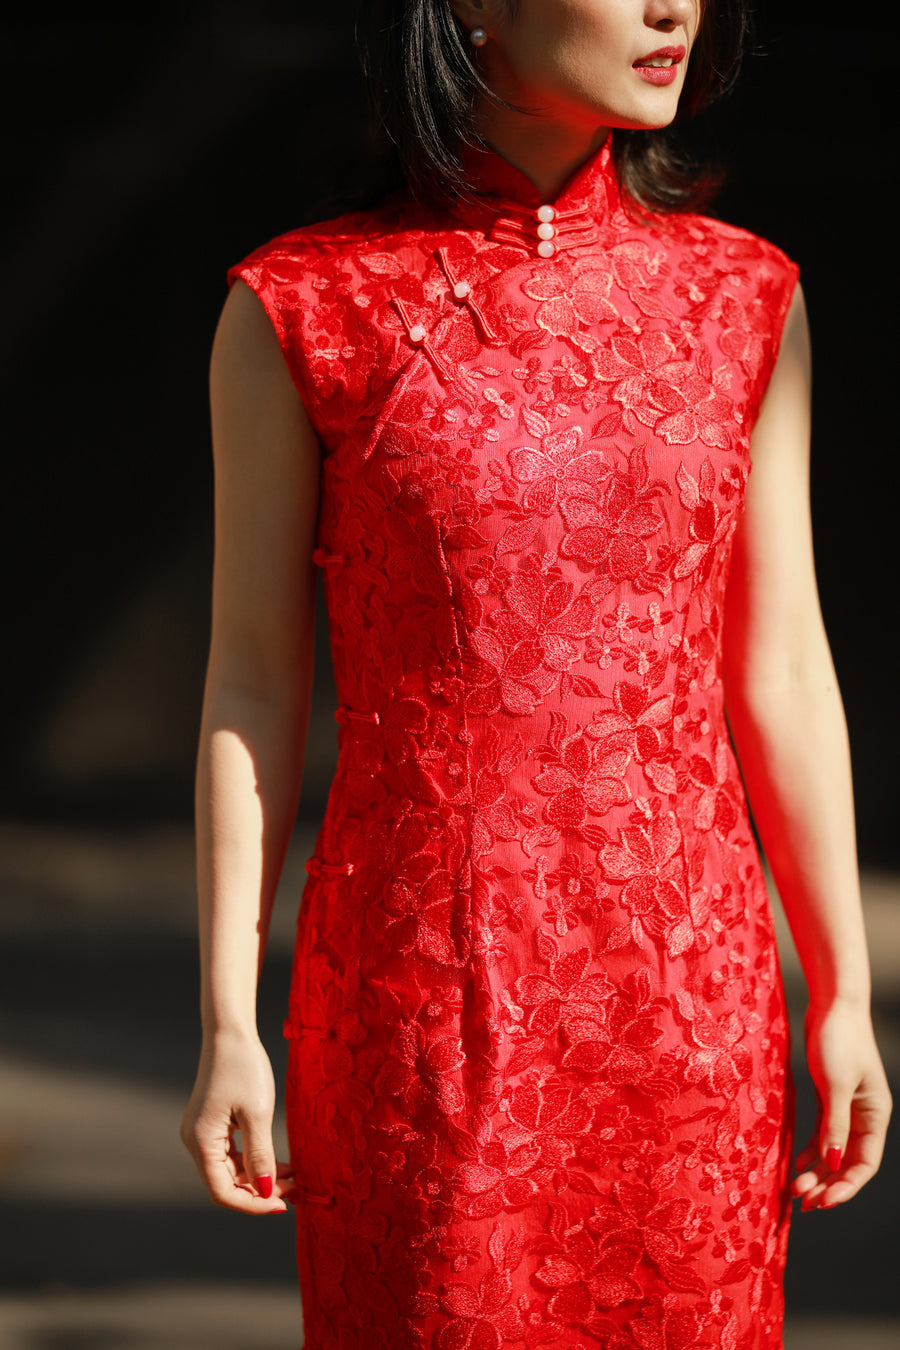 The Little Red Qipao - Scarlet Lace